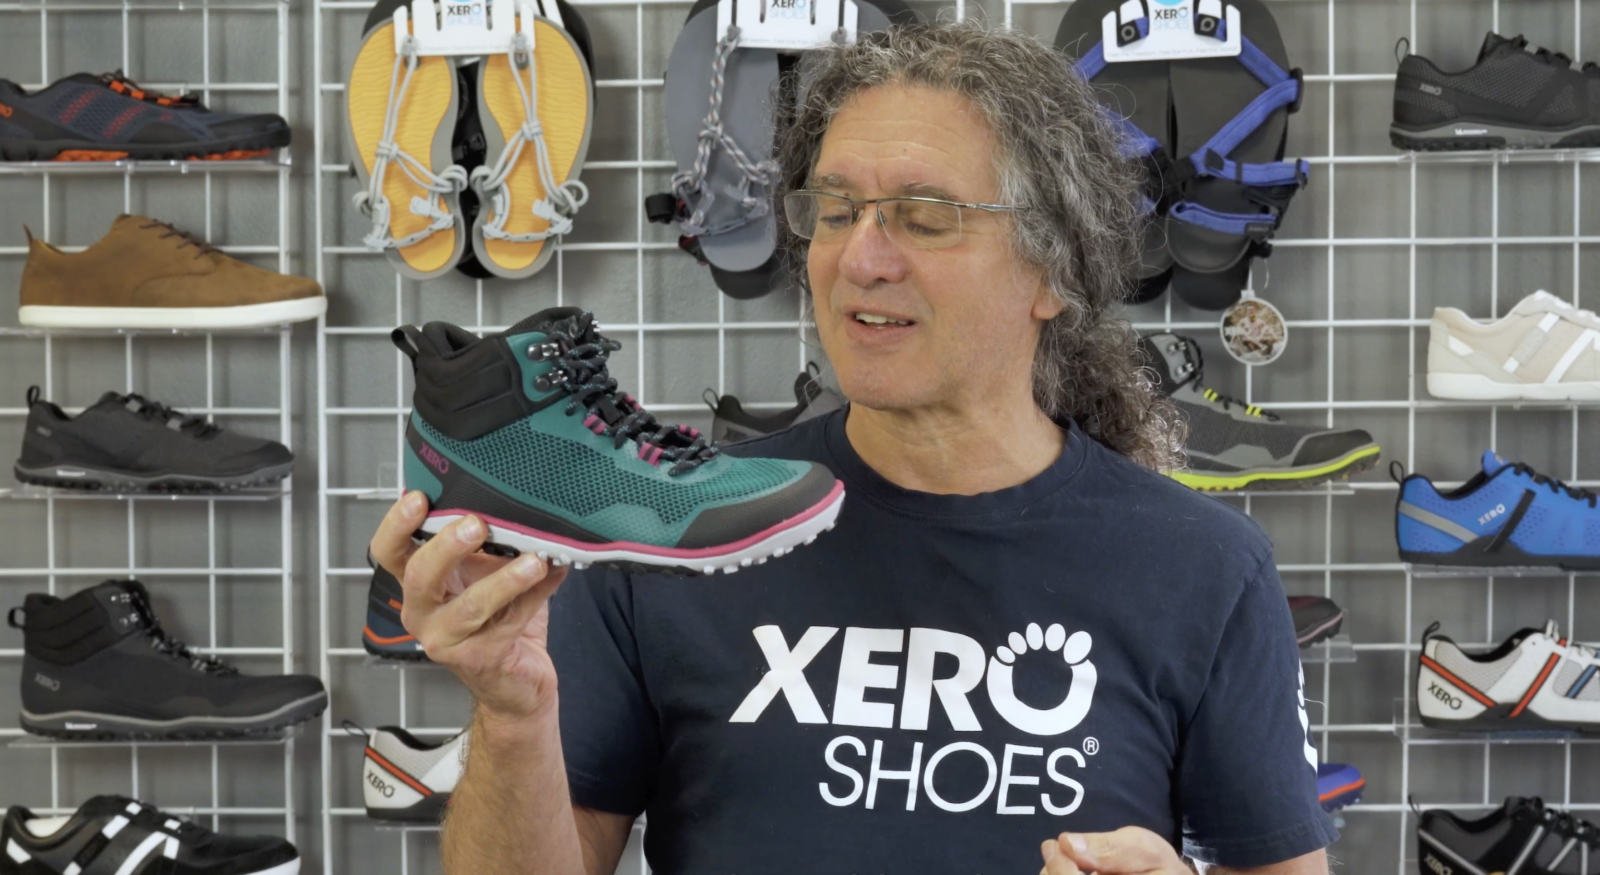 Xero Shoes Named One of the Best Walking Shoes by Penny Hoarder - Xero Shoes